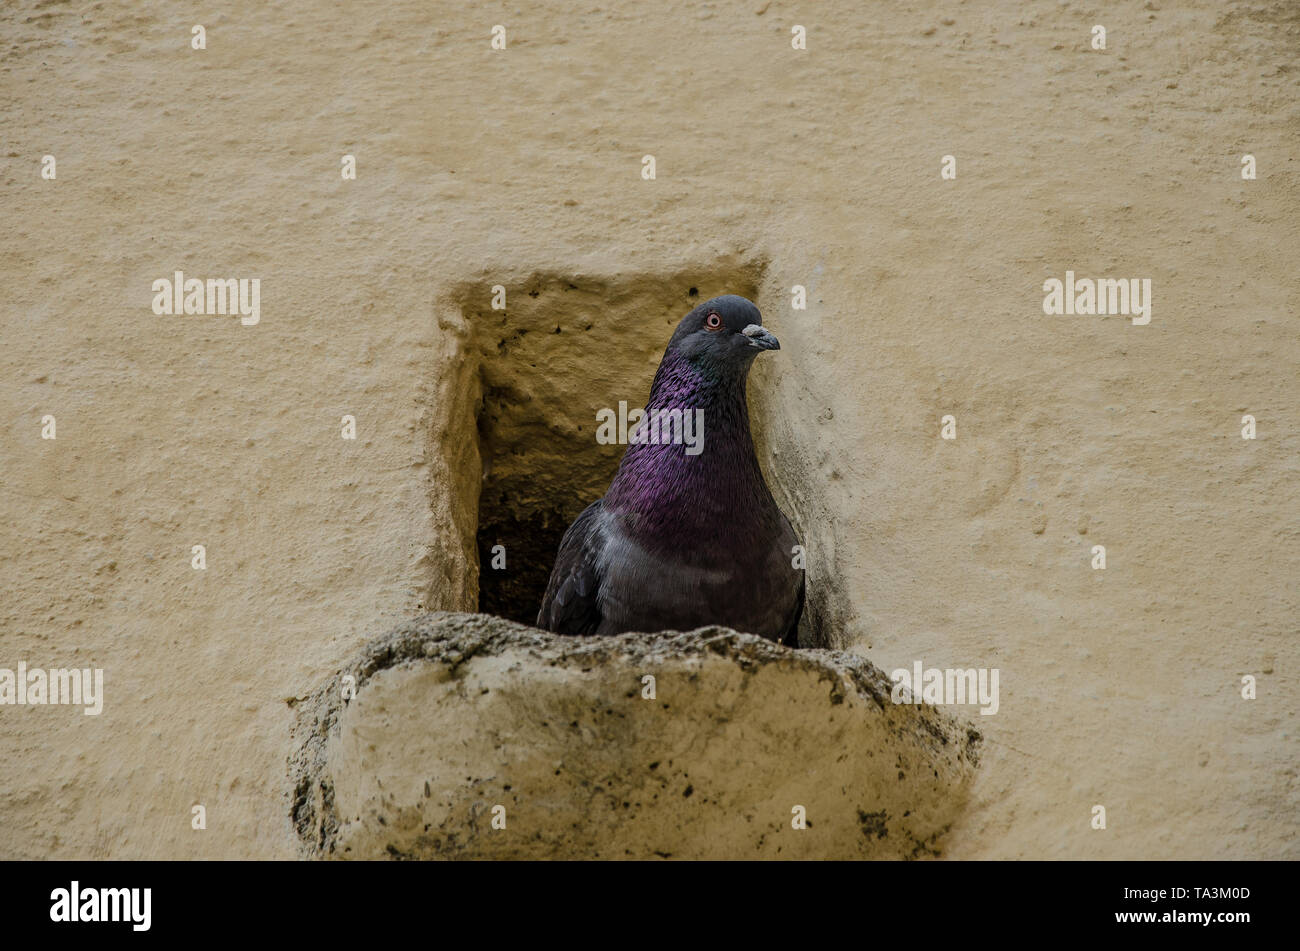 Pigeons build a flimsy platform nest of straw and sticks, put on ledge, under cover, often located on the window ledges of buildings. Stock Photo